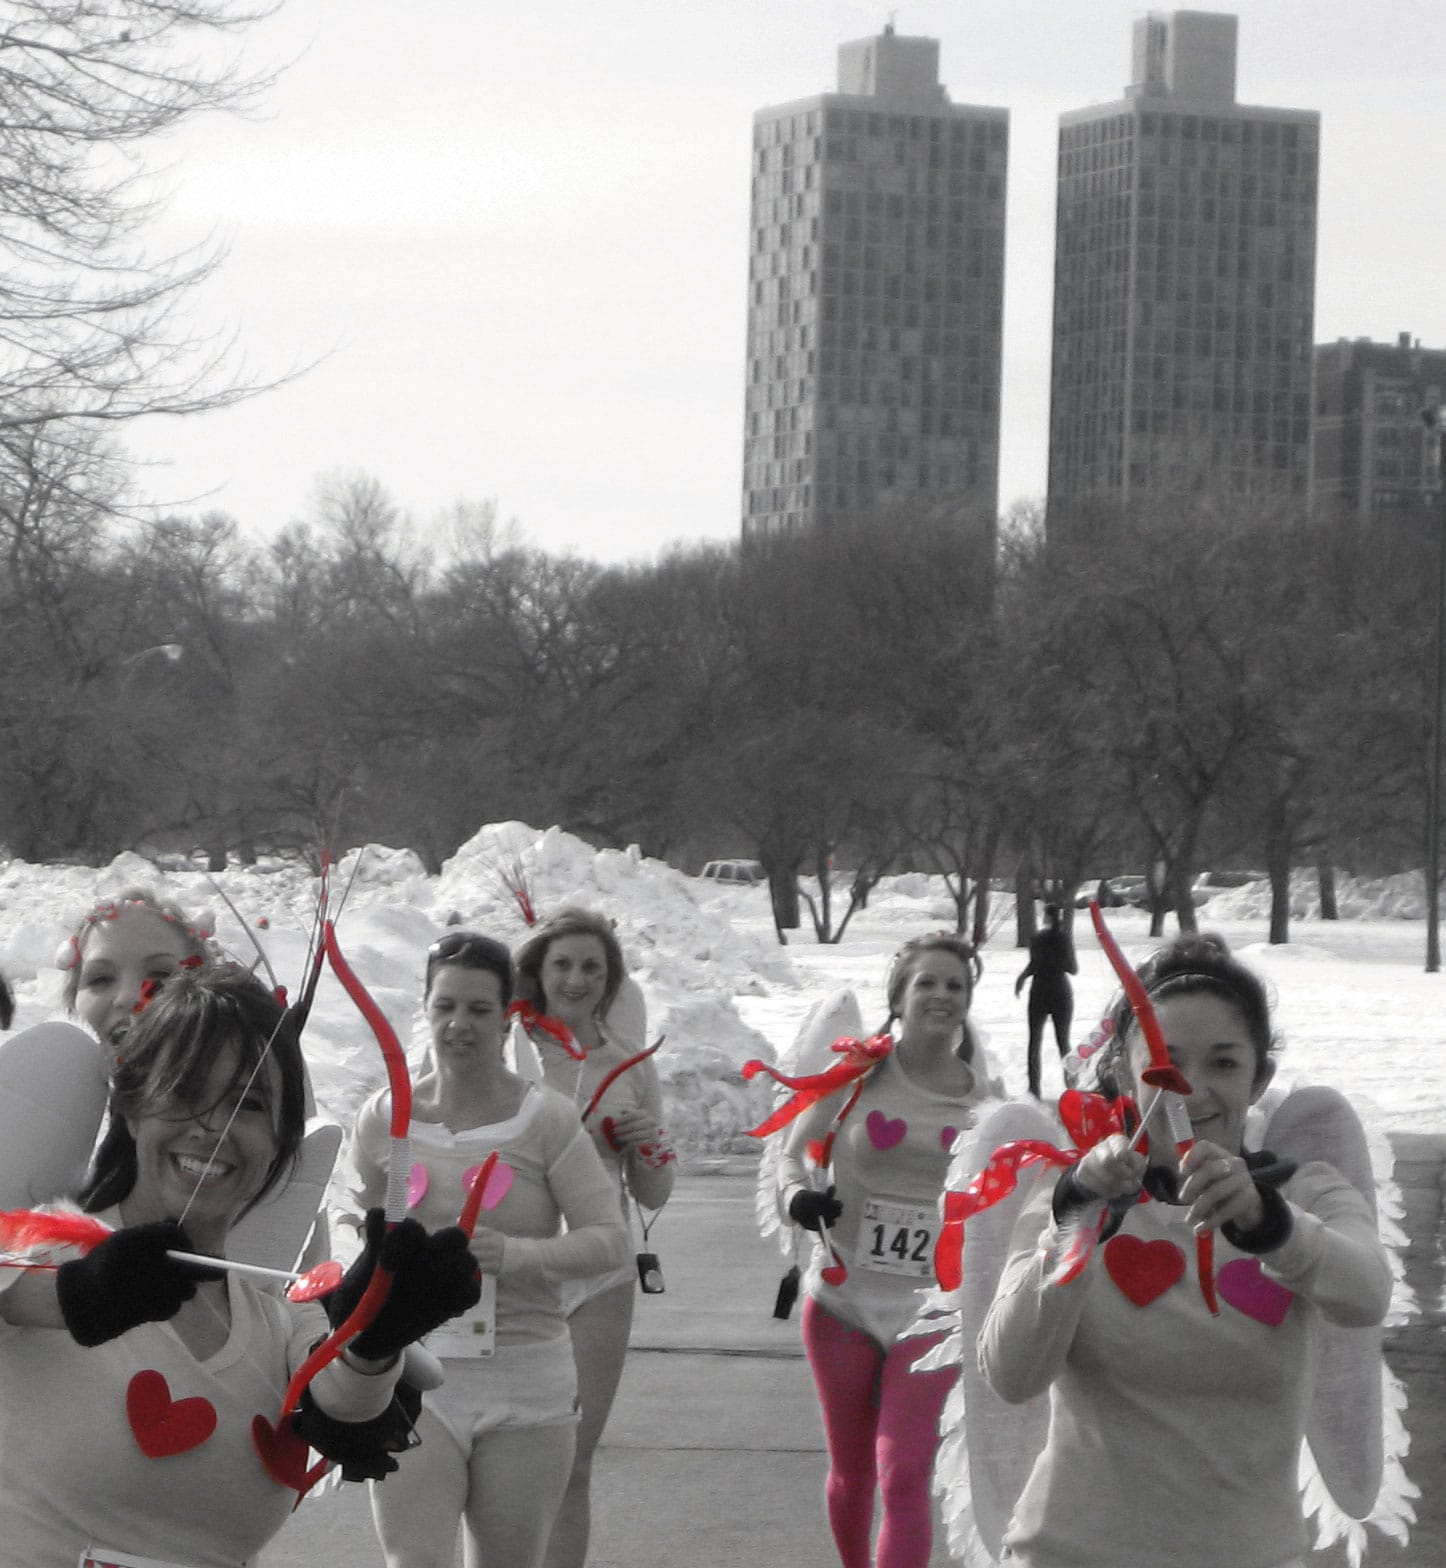 CUPIDS CHASE 5K Chicago